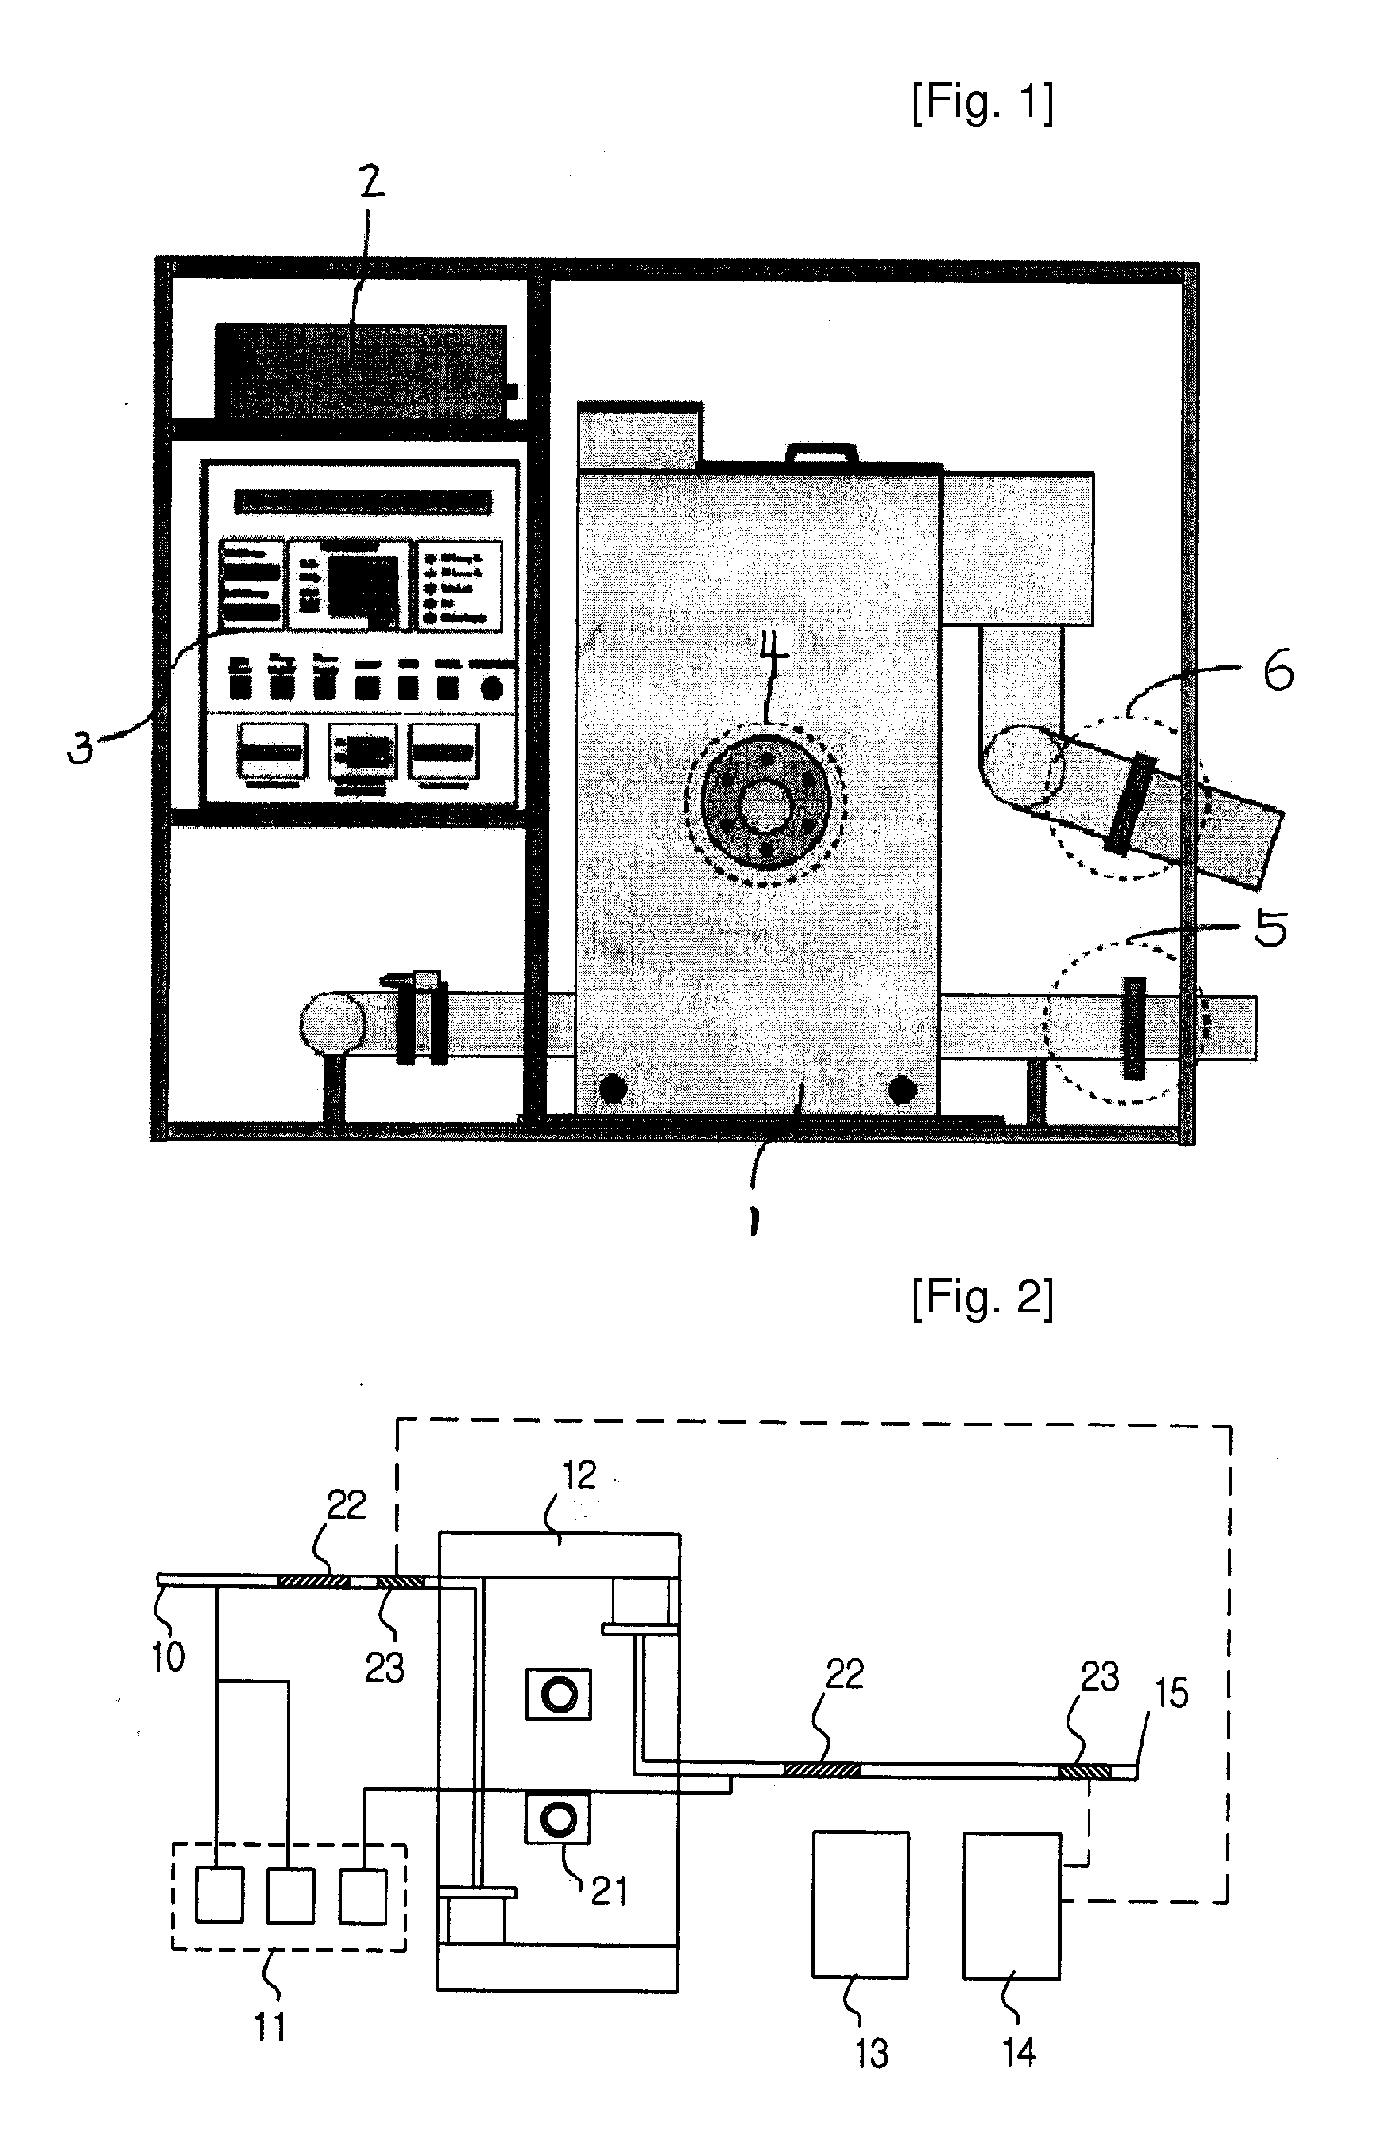 Water treatment equipment using pulsed ultraviolet lamp